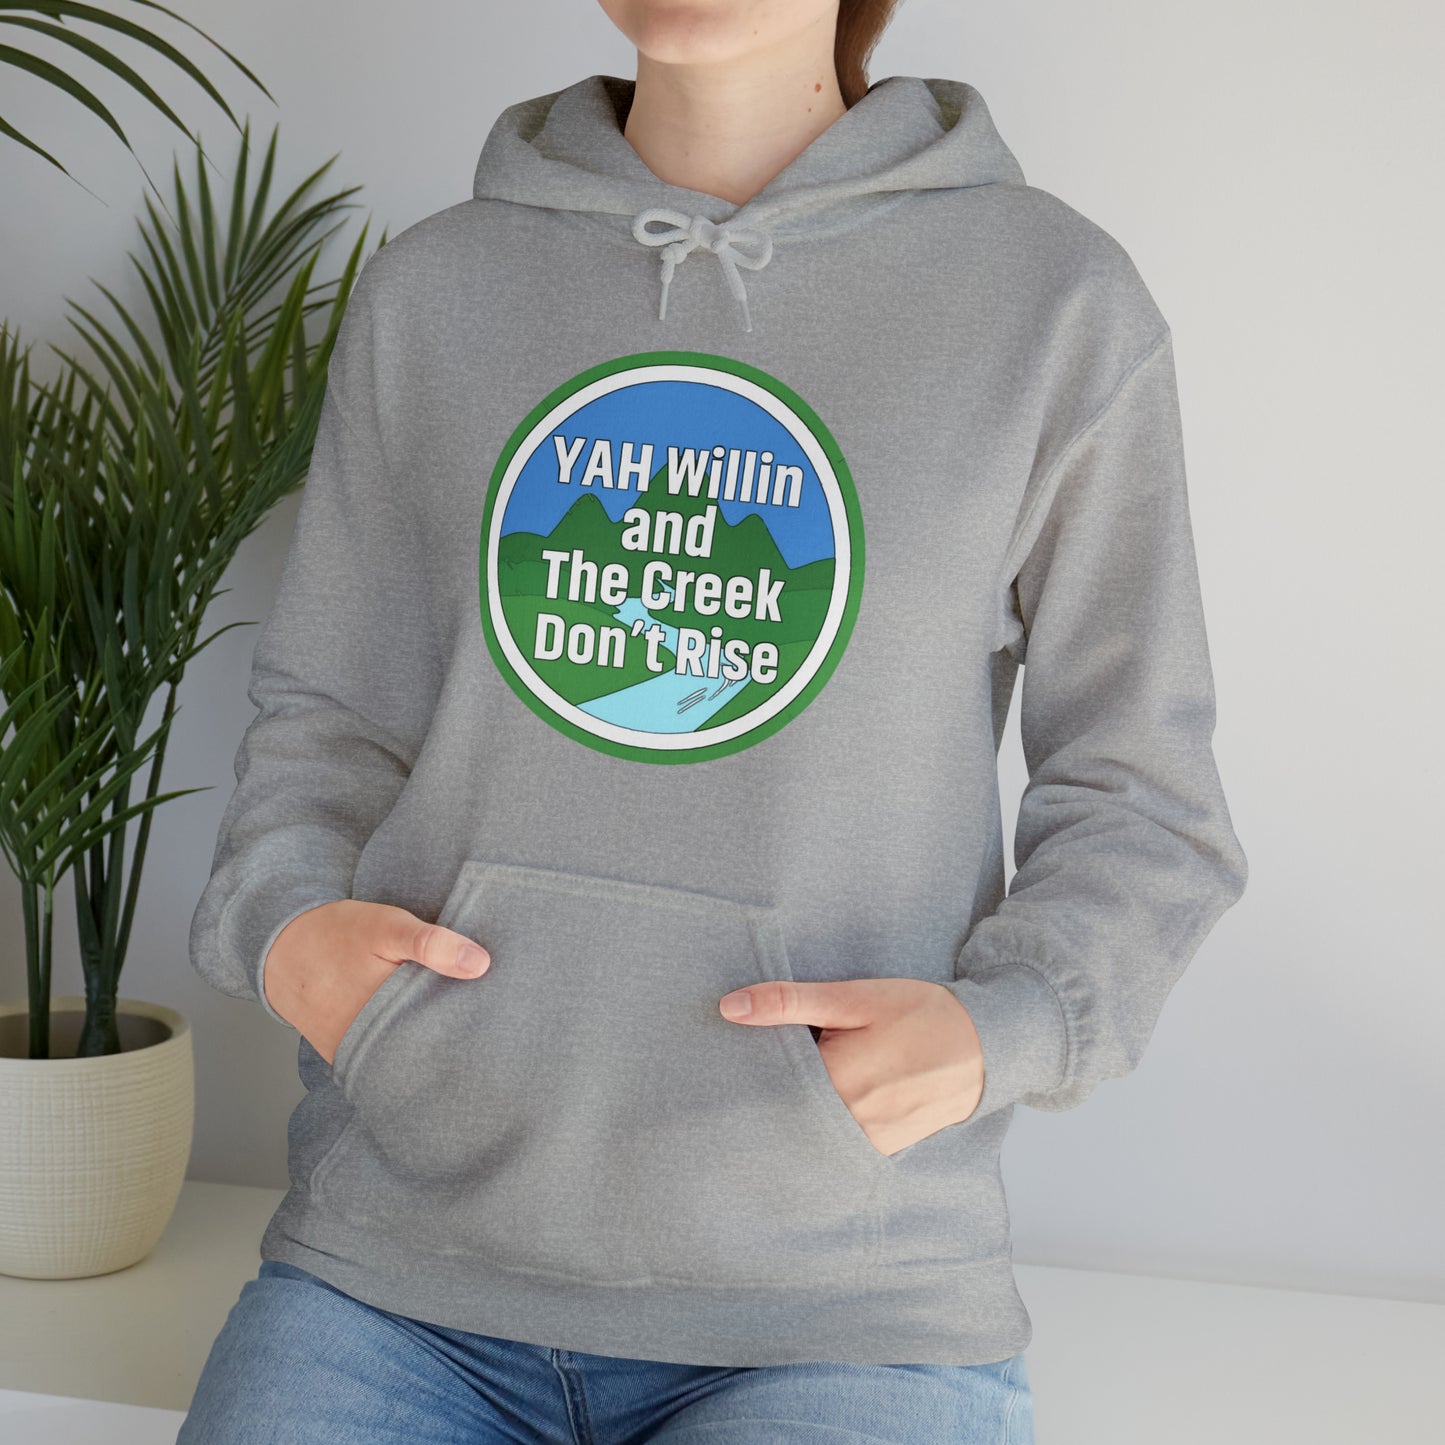 Yah Willin and the Creek Don't Rise Hooded Sweatshirt (Green Pastures Apparel)